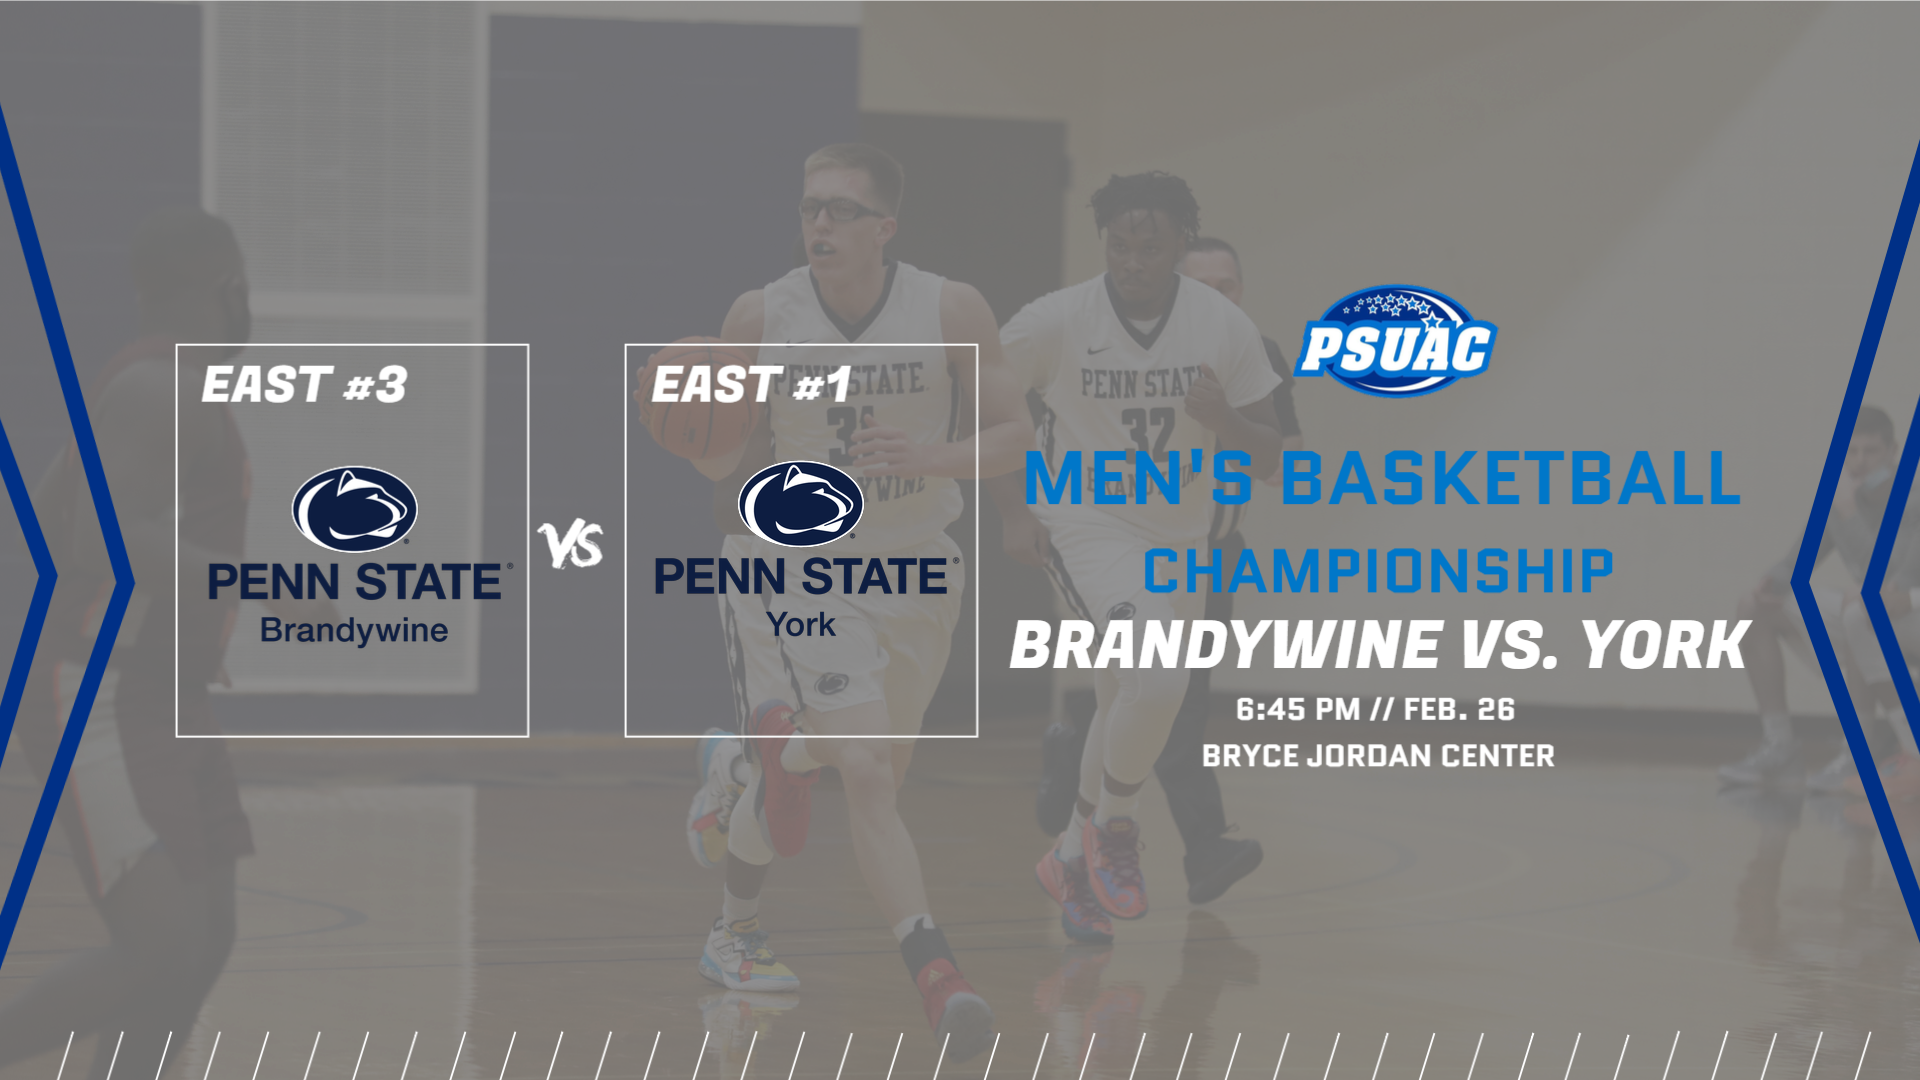 Penn State Brandywine and Penn State York will meet for the 2022 PSUAC Men's Basketball Championship.